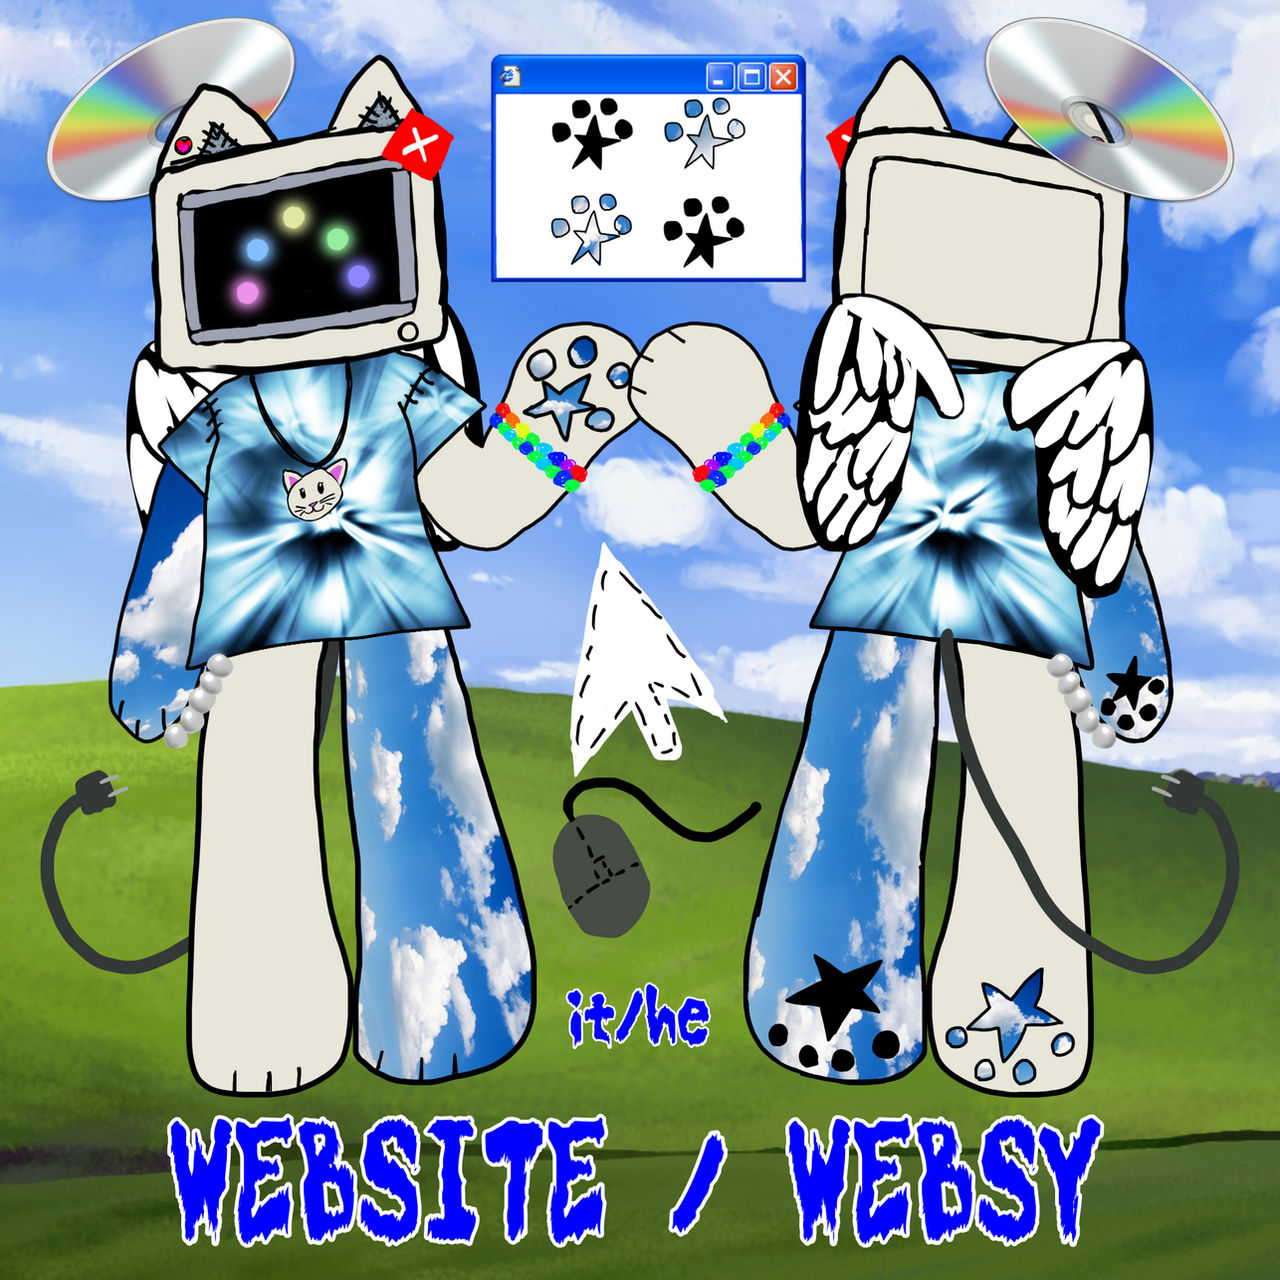 websy an oc of mine based off of robot pets from the 2000s